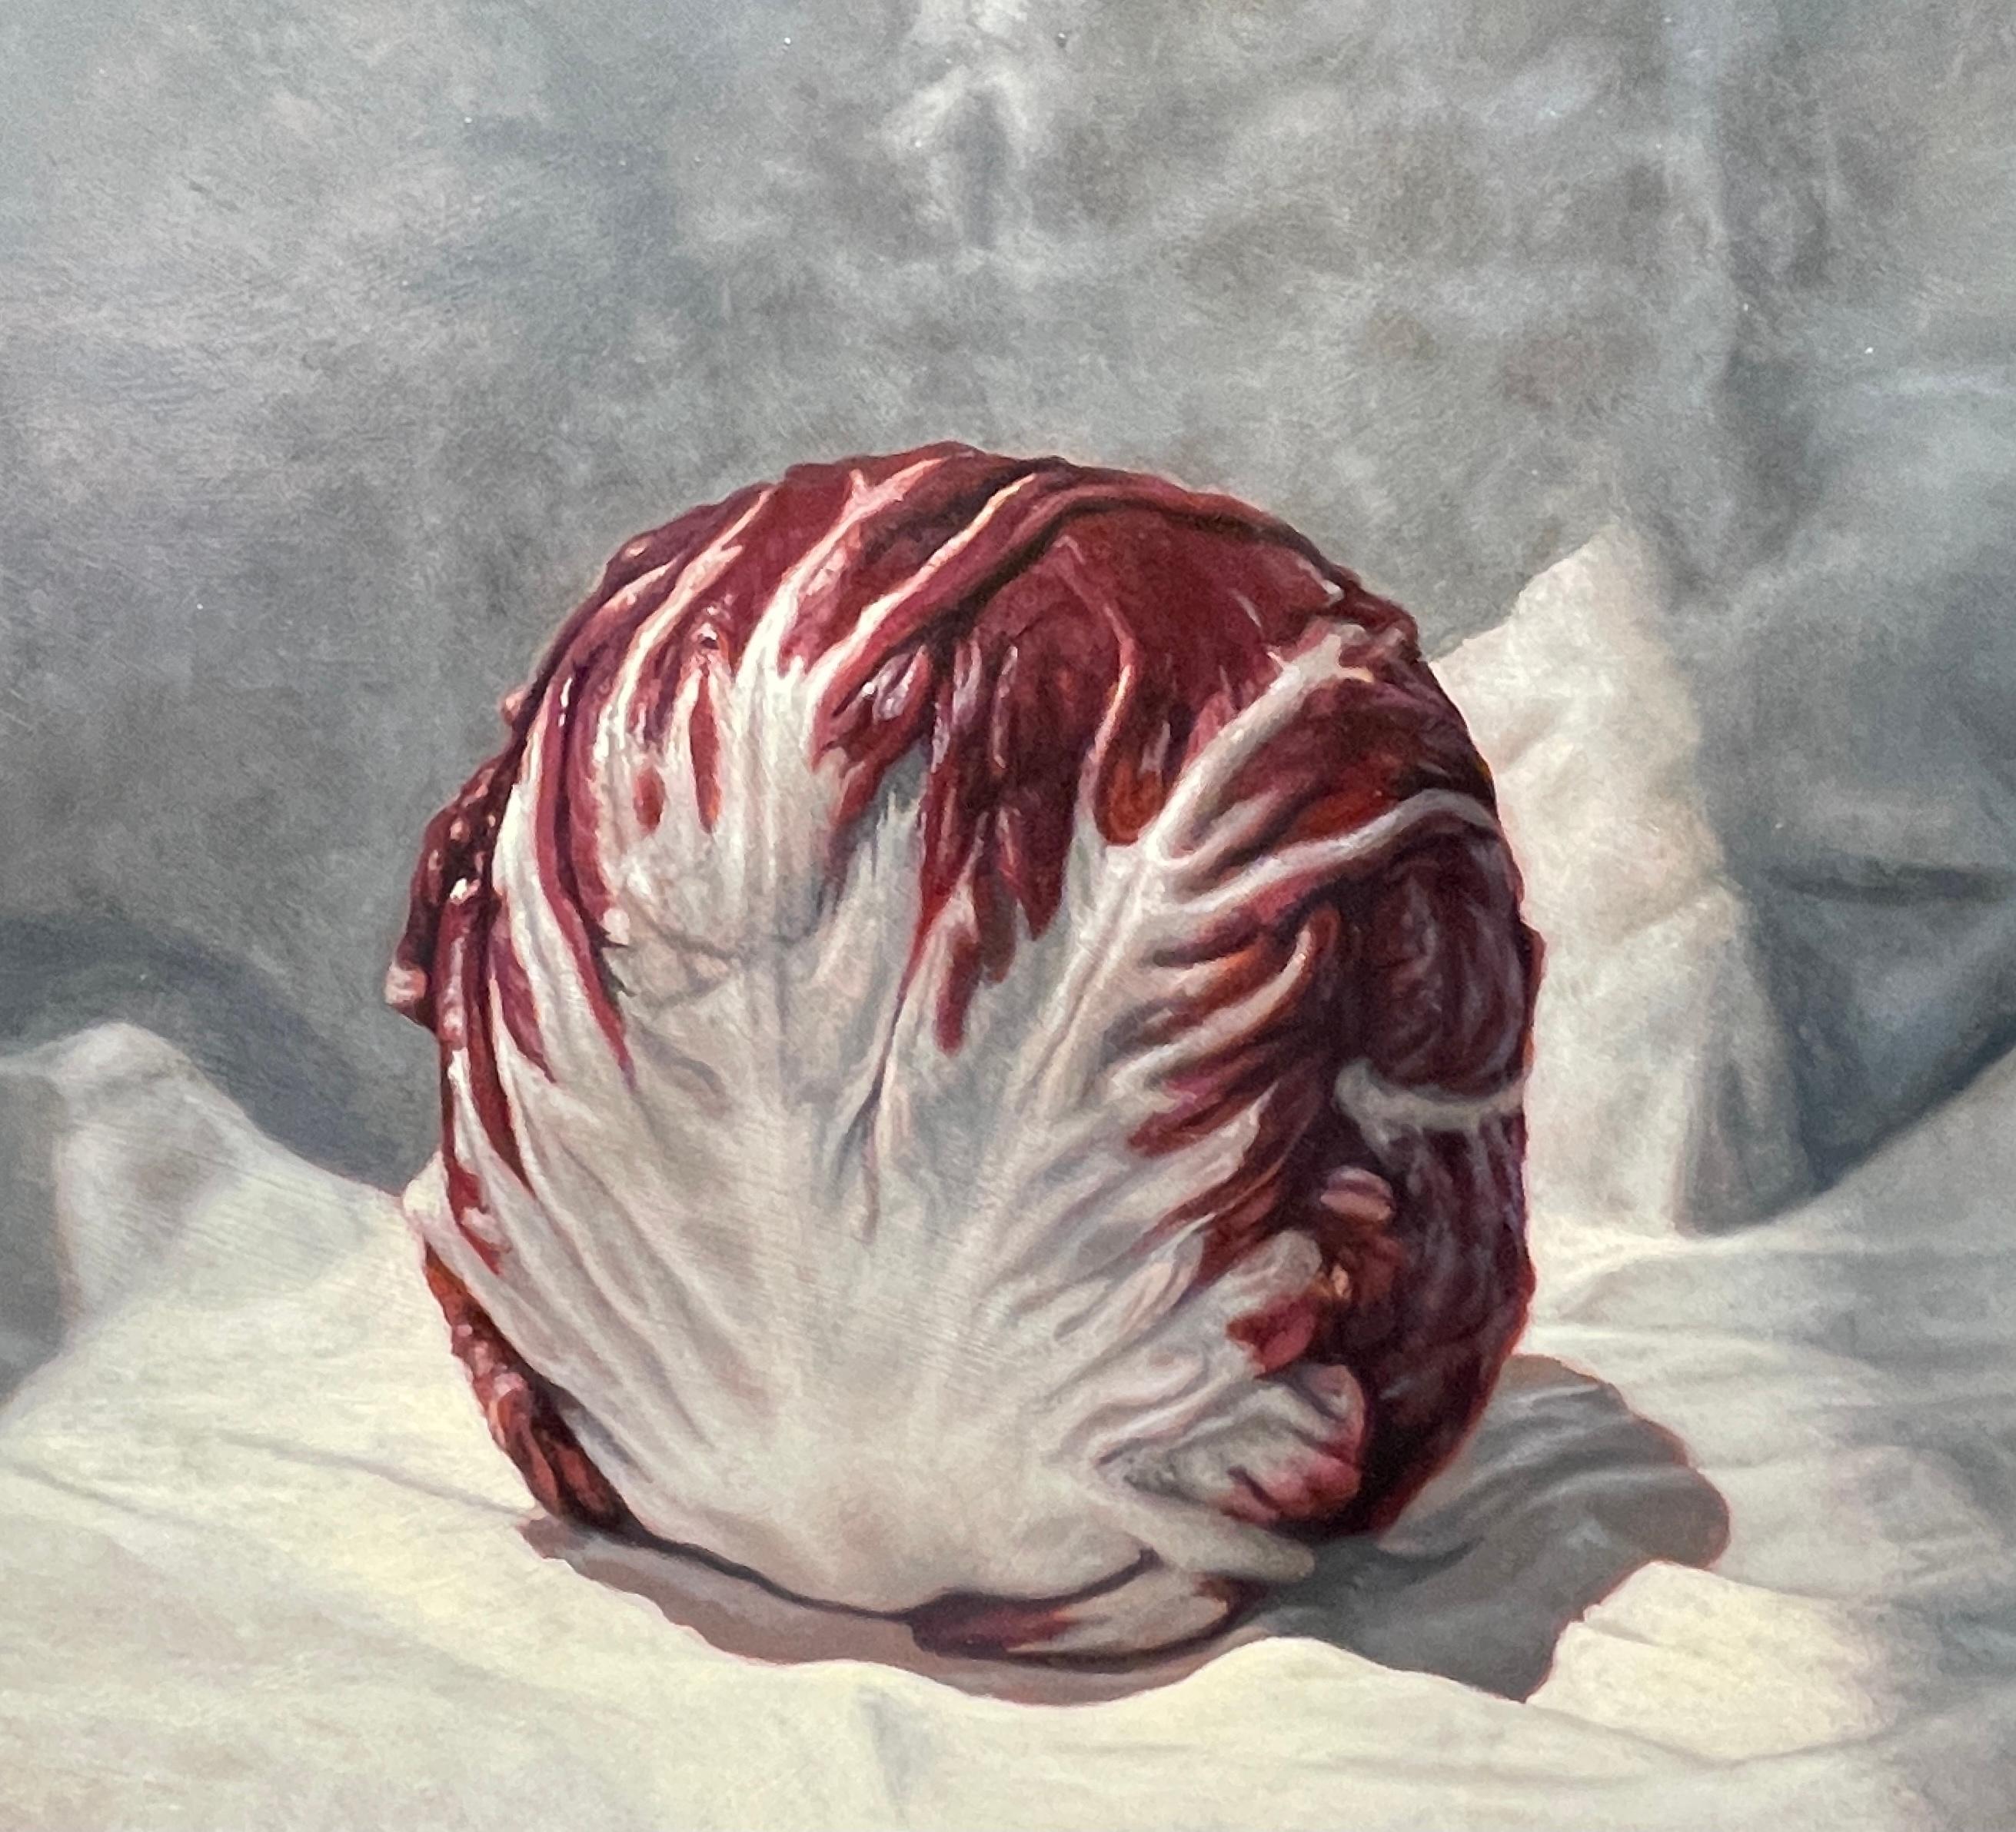 Radicchio - Still Life with a Single Radicchio Head on Gray Satin, Framed - Contemporary Painting by Jeff Aeling